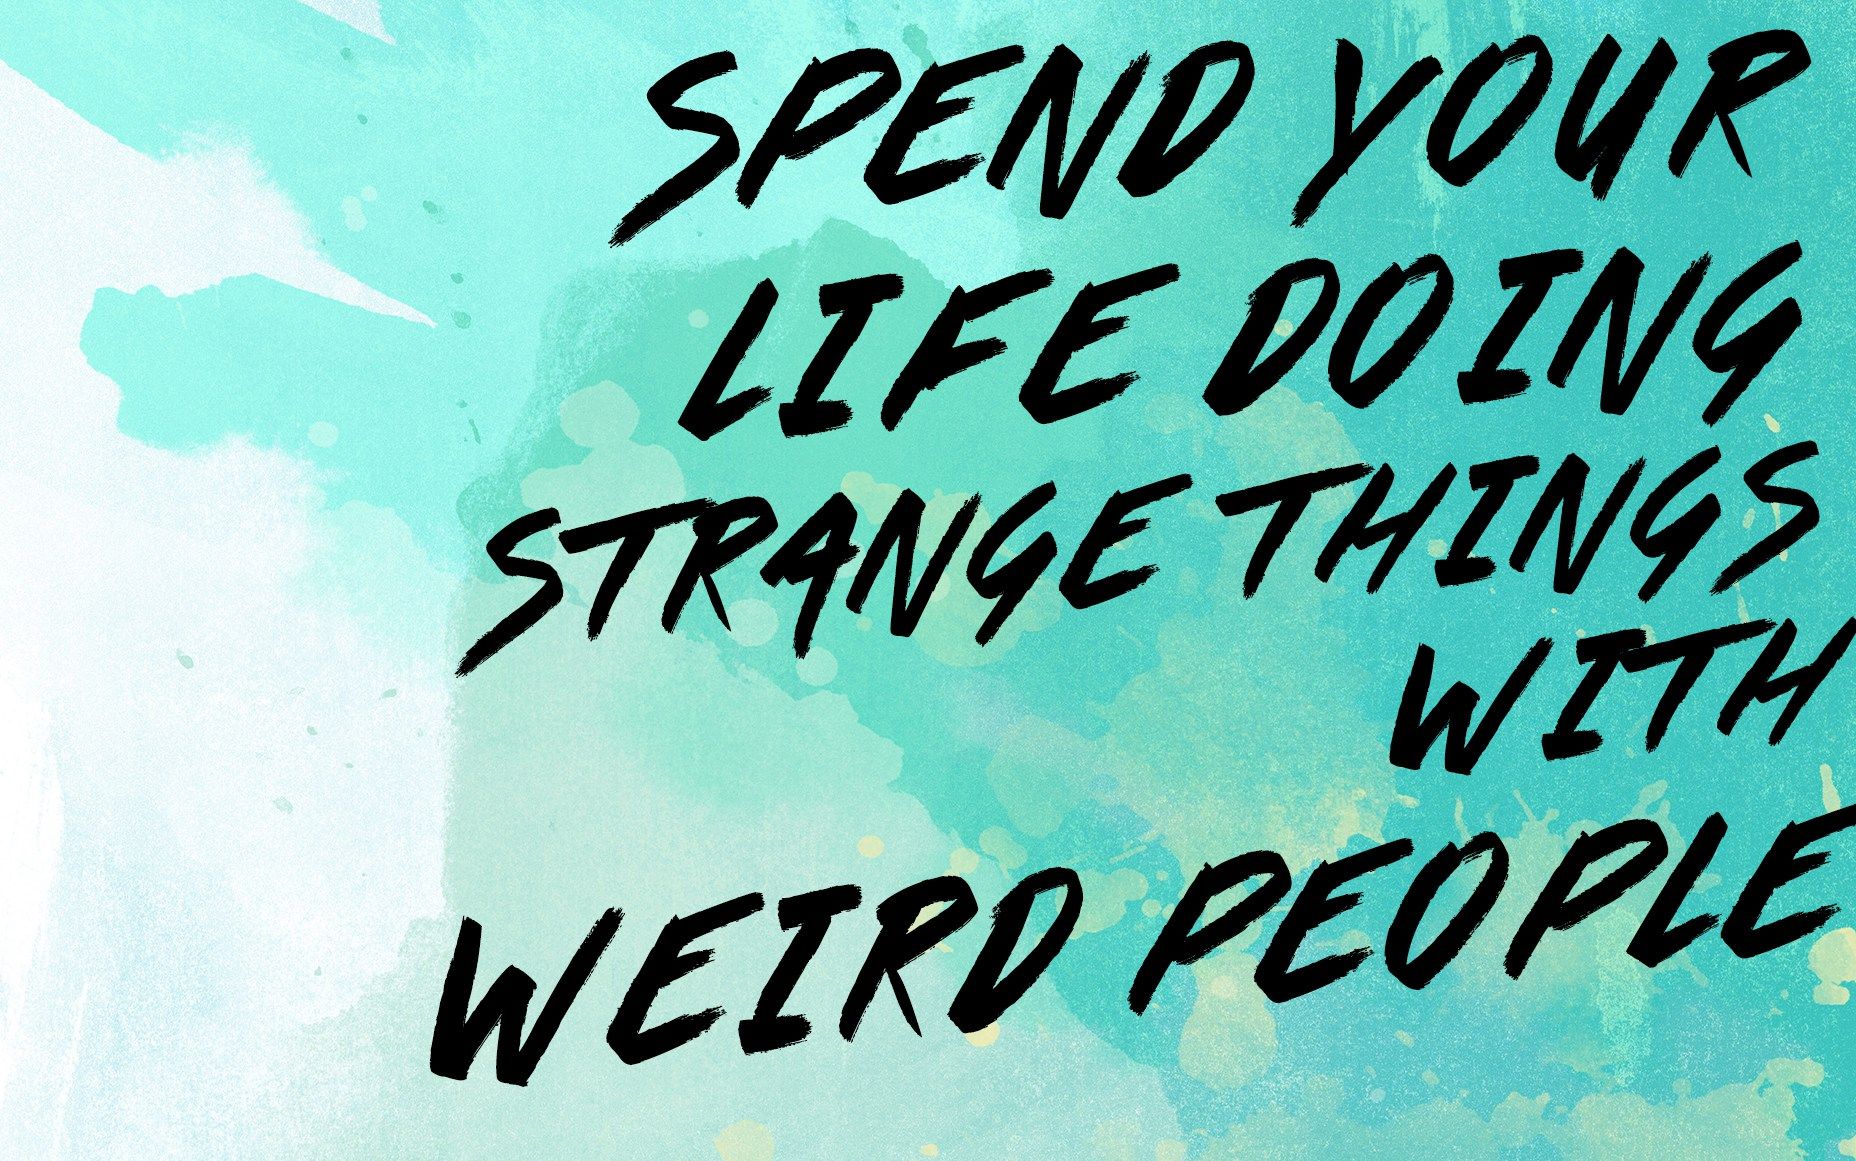 SPEND YOUR LIFE DOING STRANGE THINGS WITH WEIRD PEOPLE